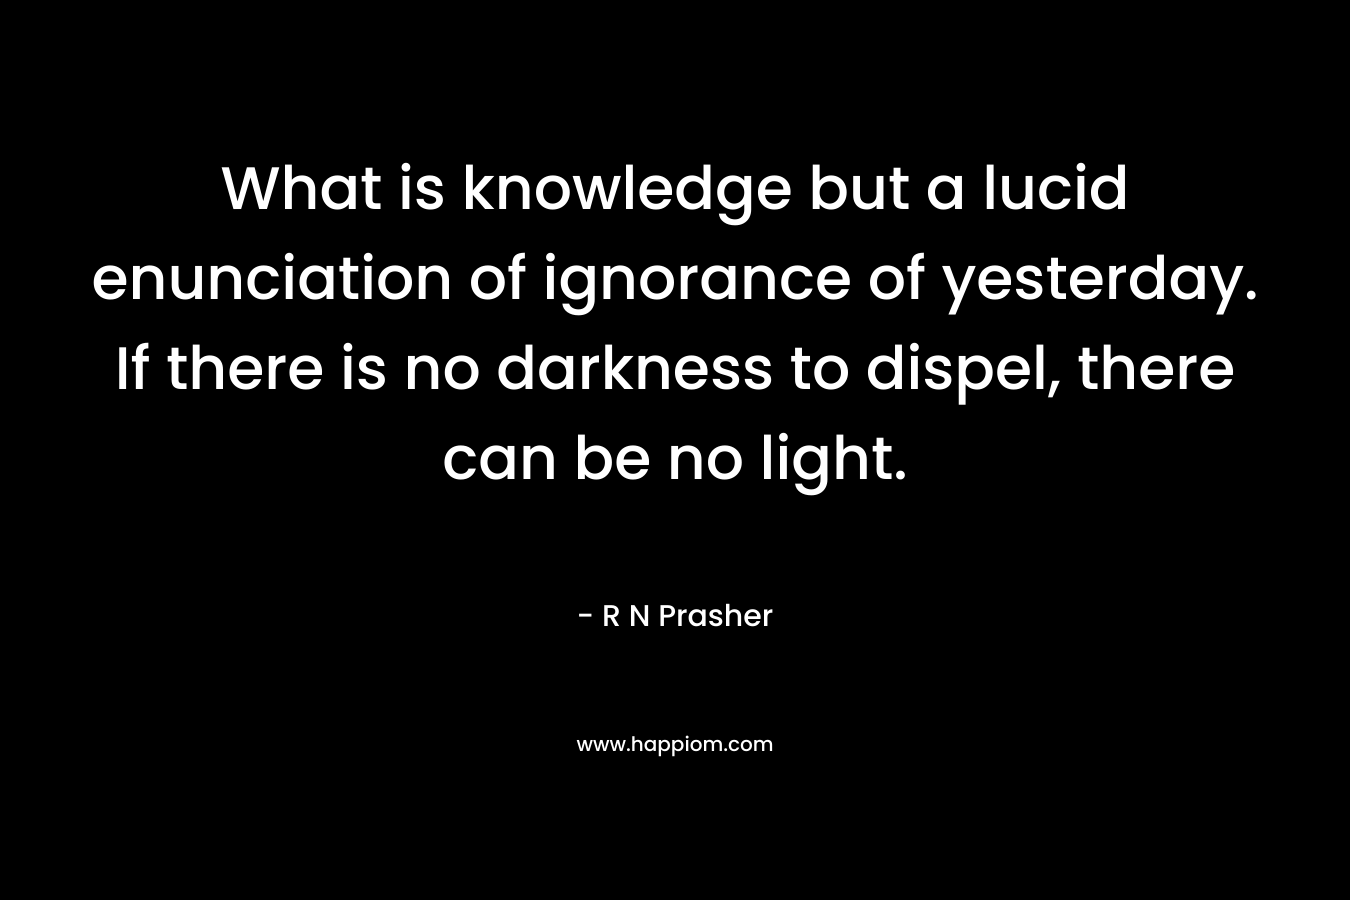 What is knowledge but a lucid enunciation of ignorance of yesterday. If there is no darkness to dispel, there can be no light.